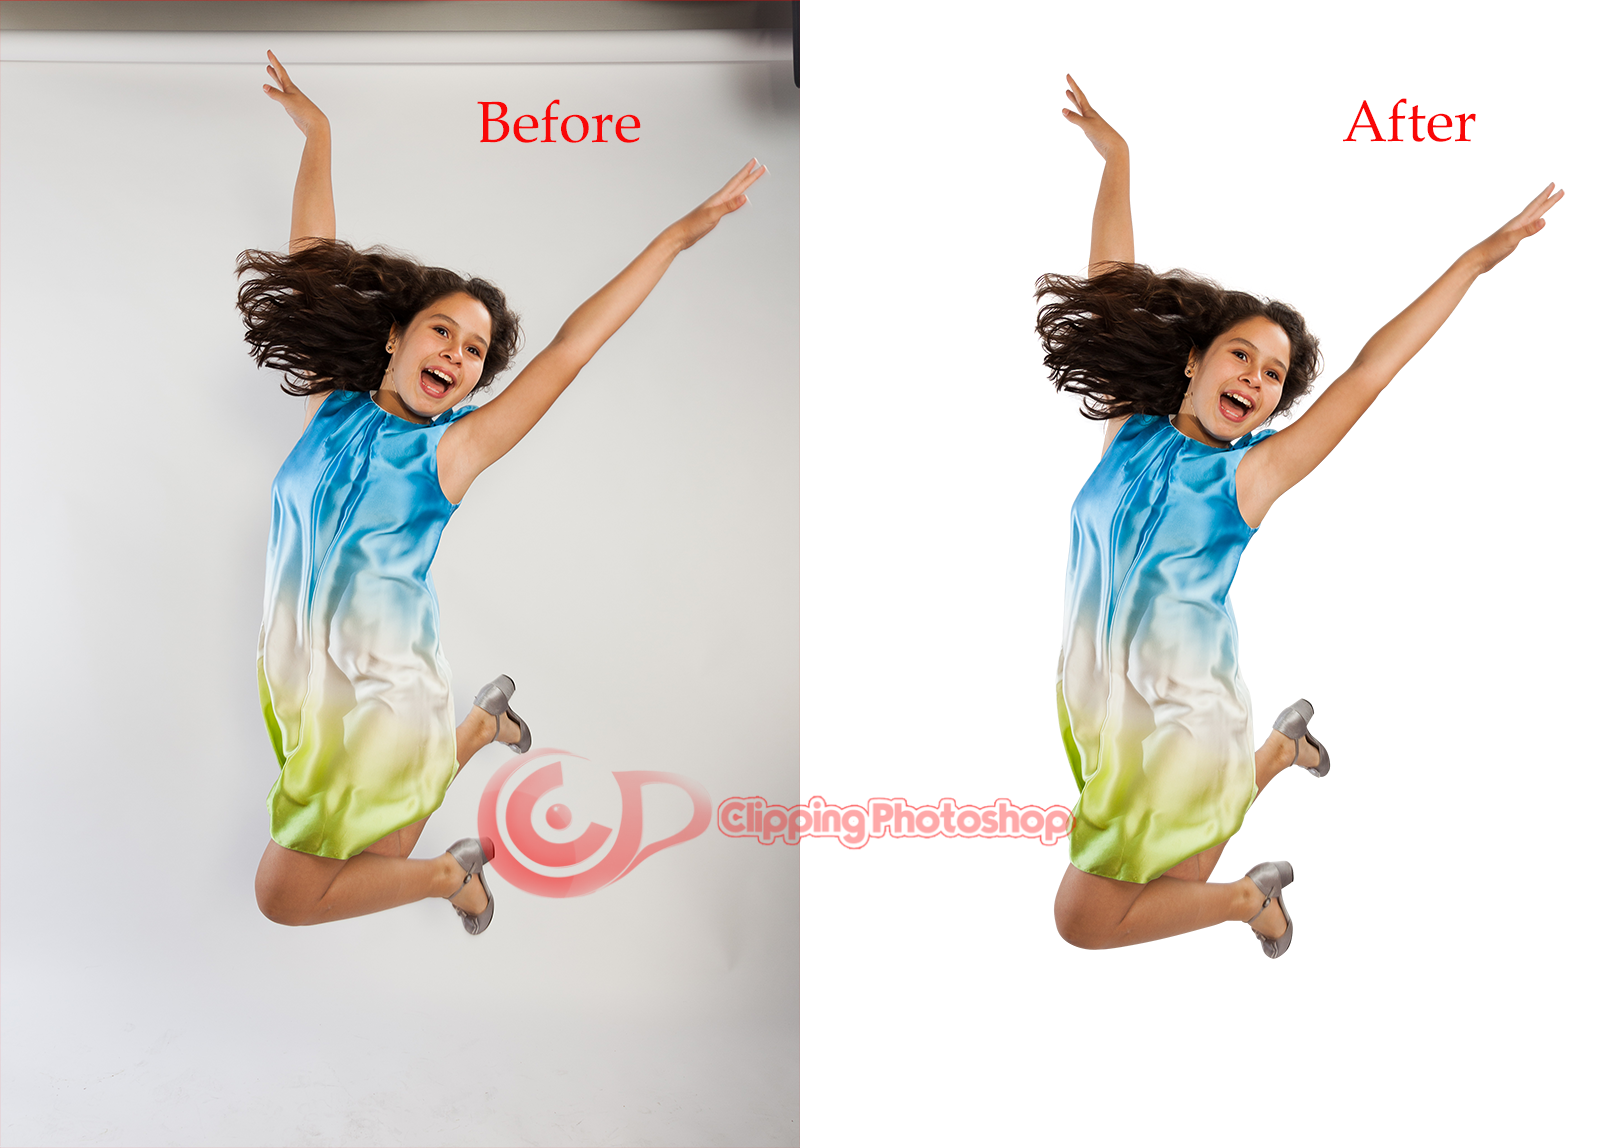 You are currently viewing Clipping Photoshop-Your Best Photo Editing Service Provider